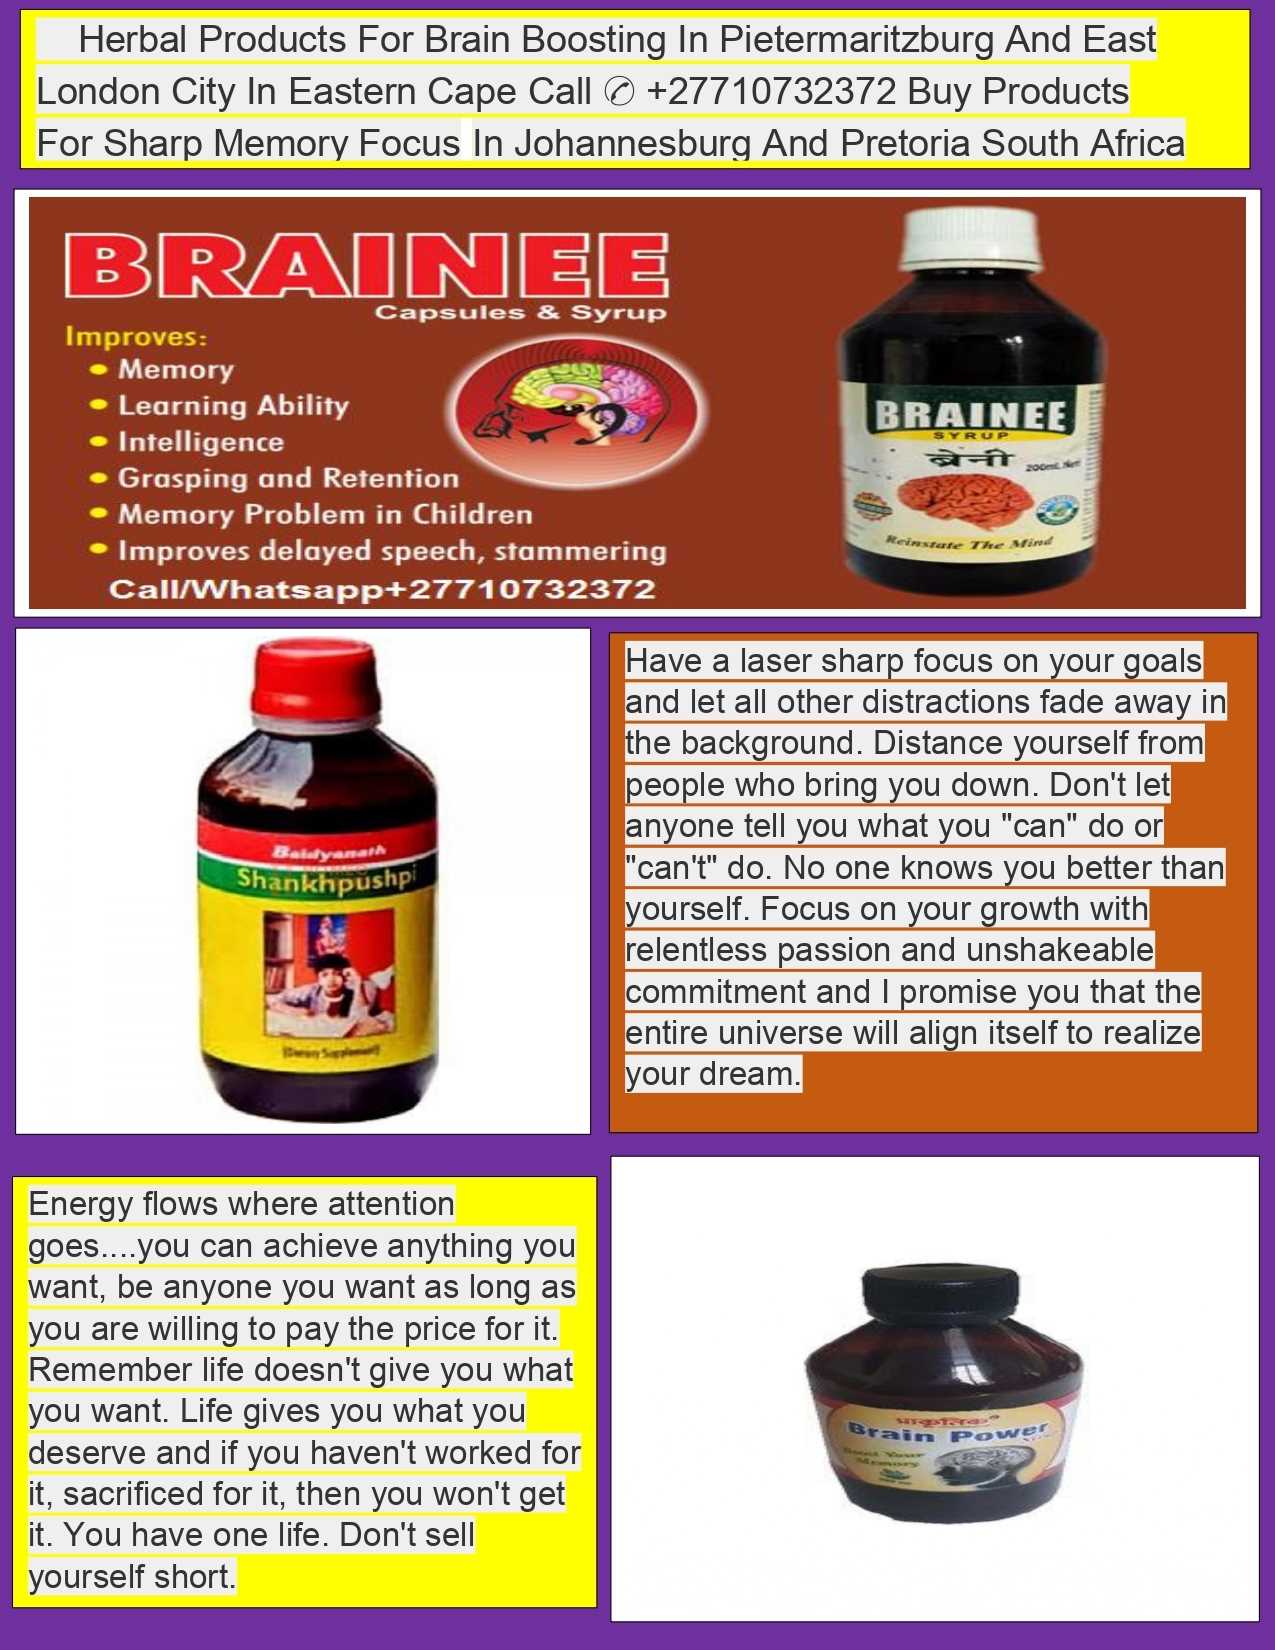 Herbal Products For Brain Boosting In Ballina Town in Australia And East London City In Eastern Cape Call ✆ +27710732372 Buy Products For Sharp Memory Focus In Pretoria South Africa And Candi Dasa Town In Bali, Indonesia